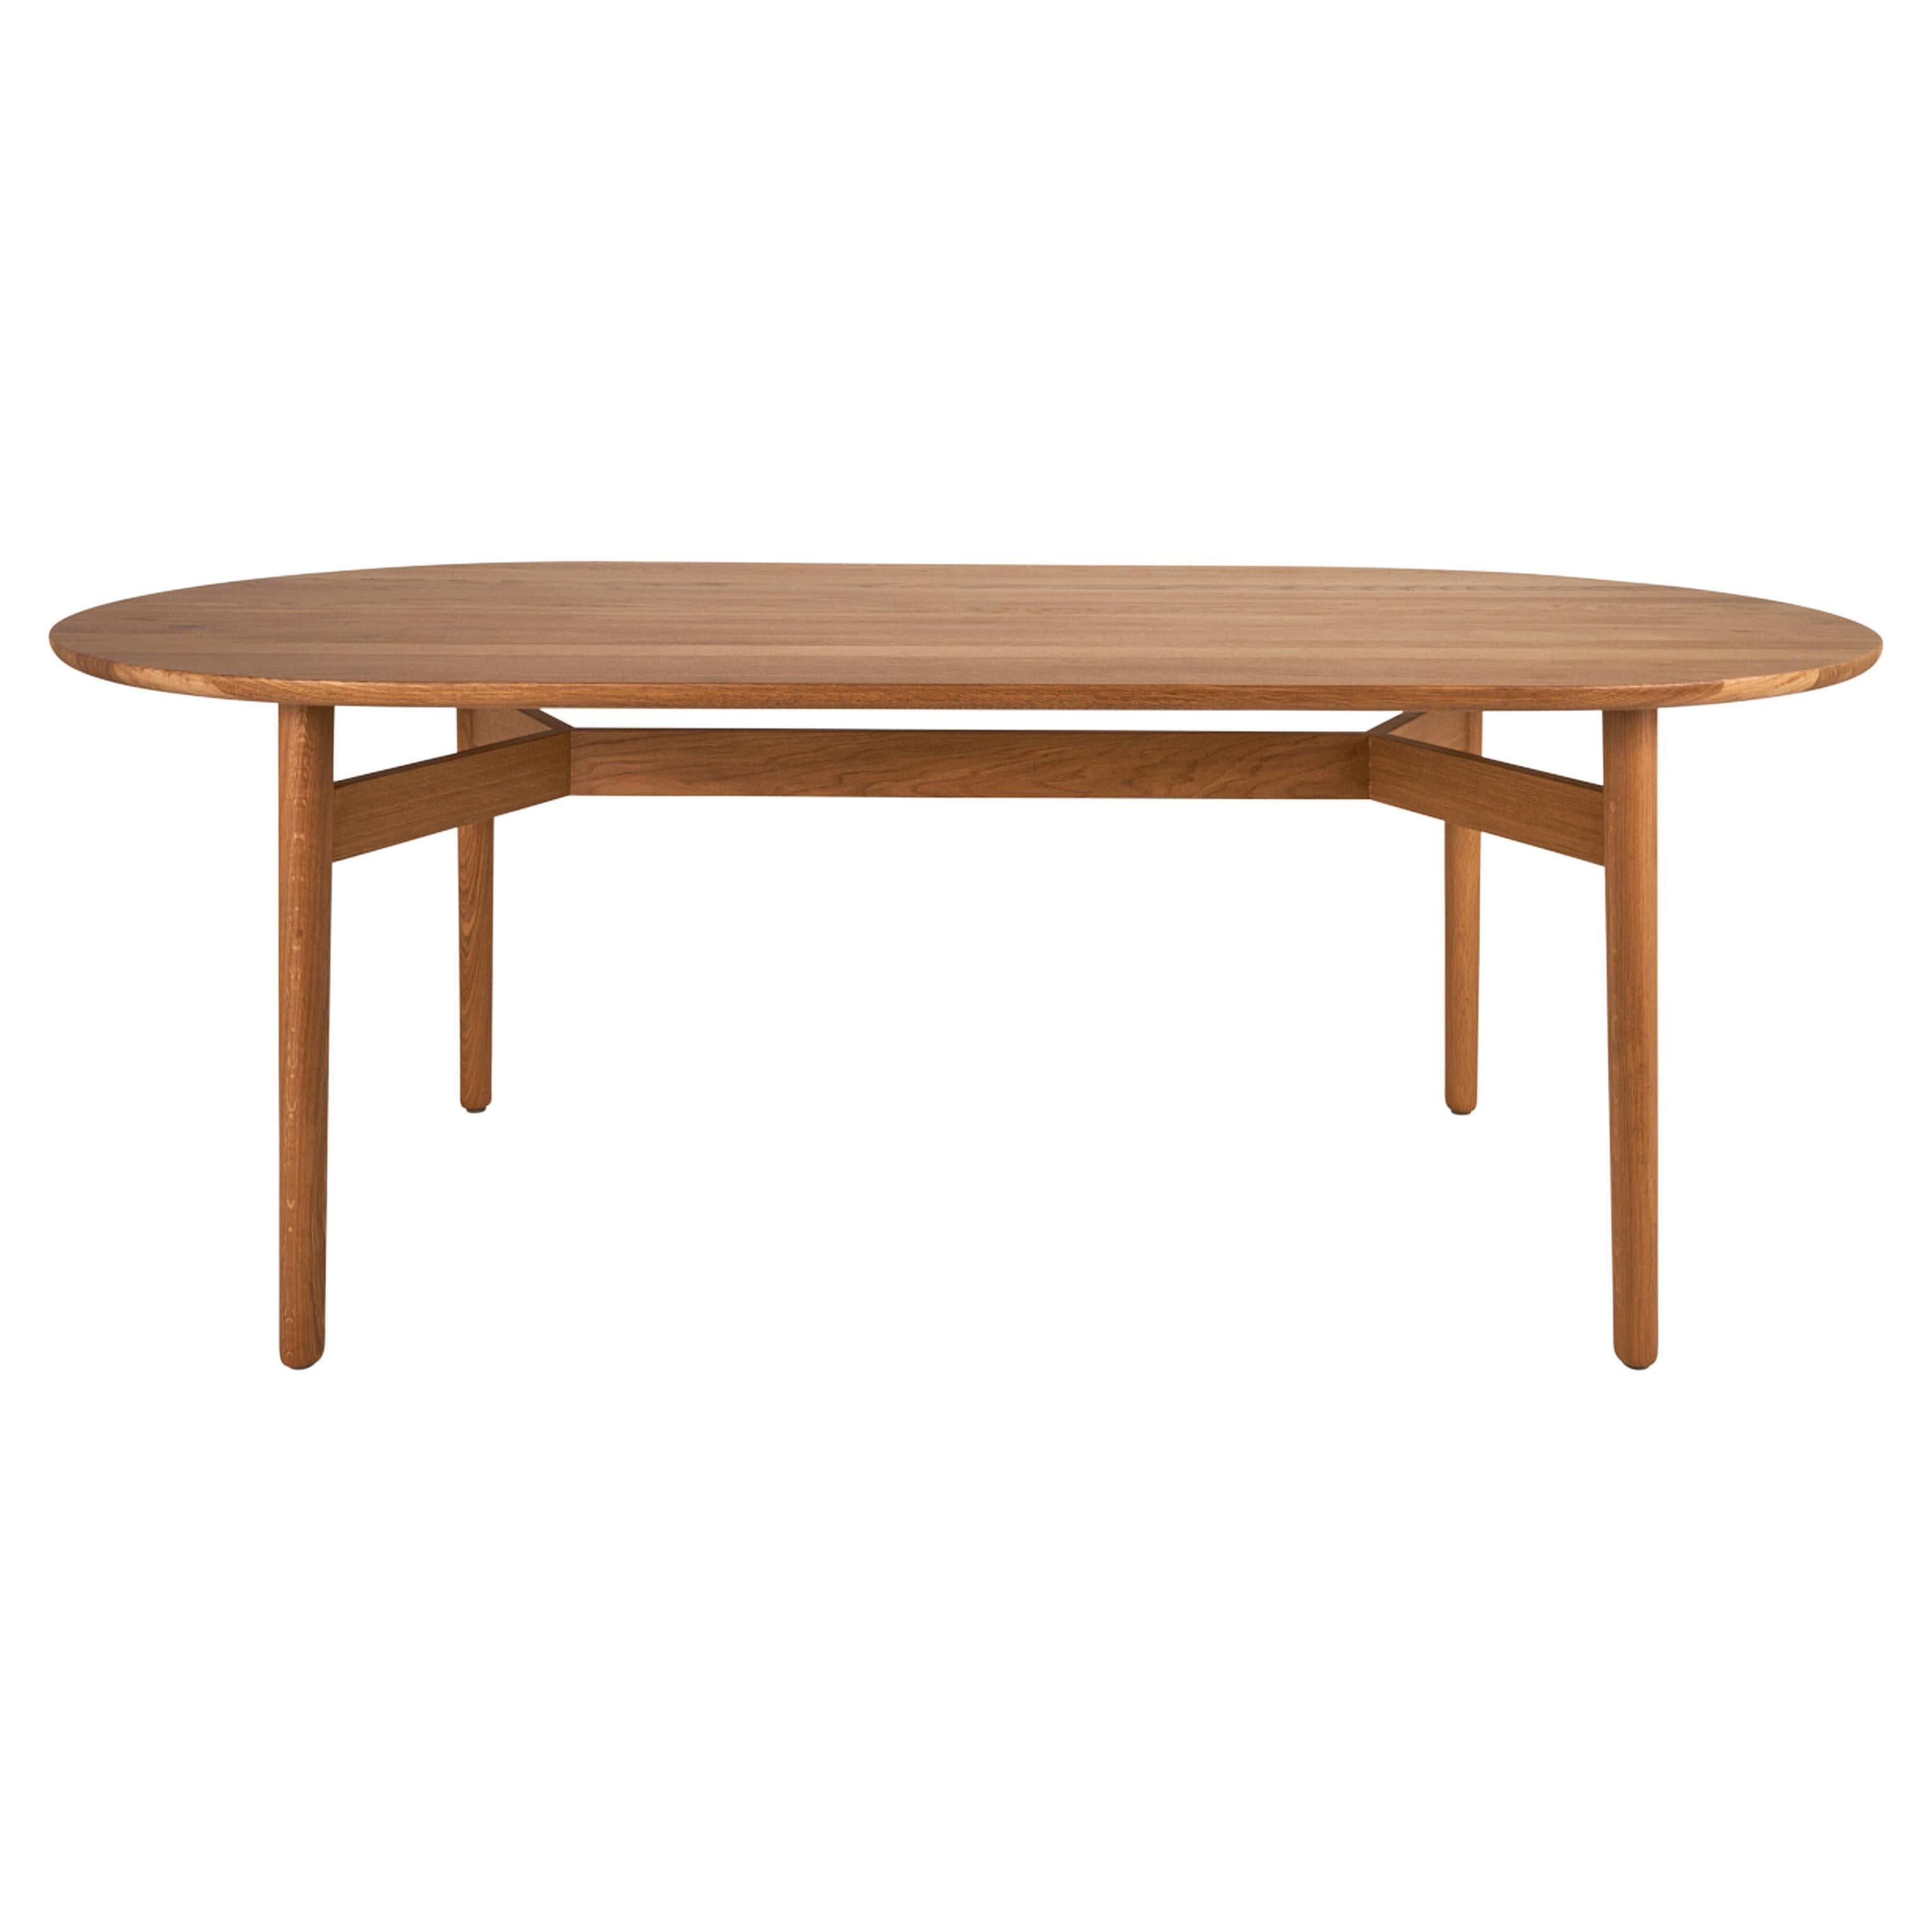 Schumacher Editions Puffin 98" Dining Table in Natural Matte For Sale